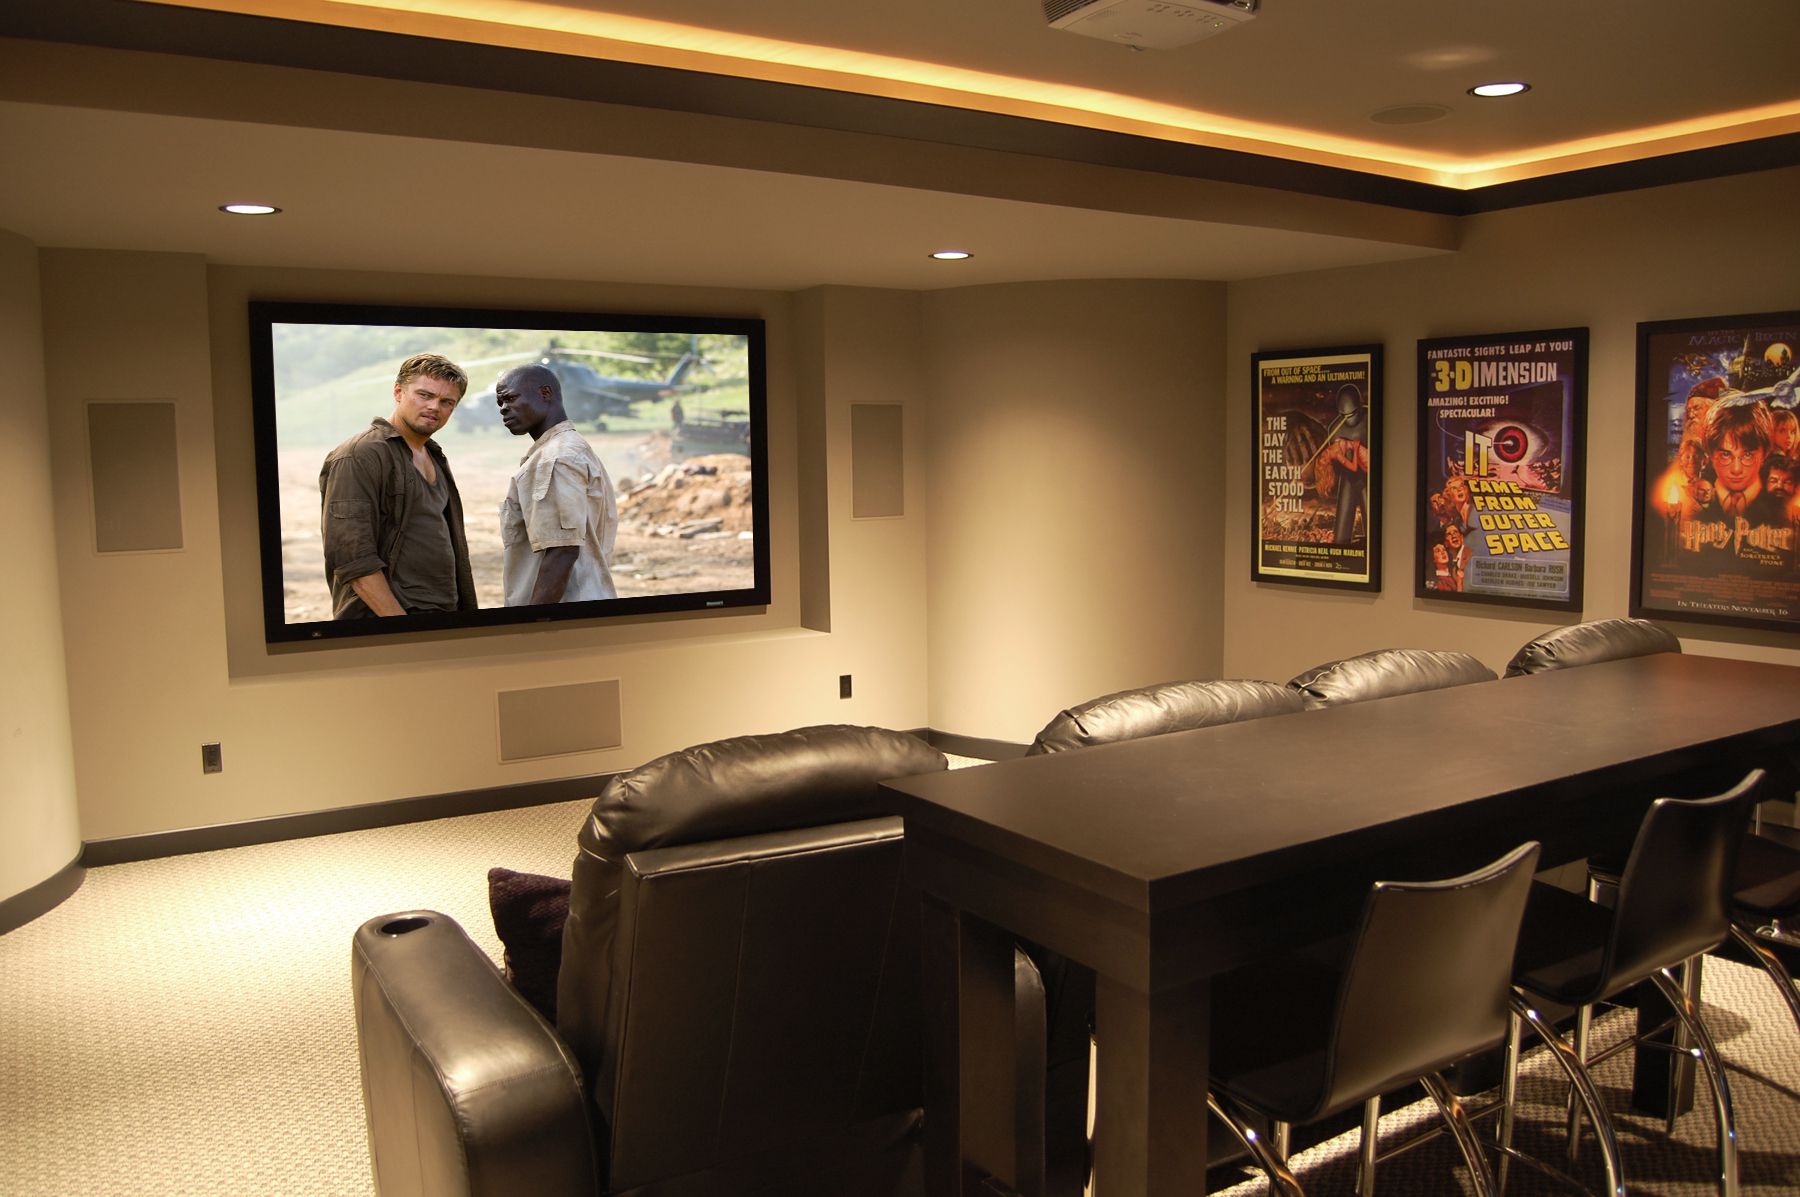 Media Room A Aesthetic Media Room Ideas In A Simple Media Room With Flat Screened TV Four Cushioned Seats Two Chairs And Some Movie Posters Decoration Decorative Media Room Ideas In Contemporary Design